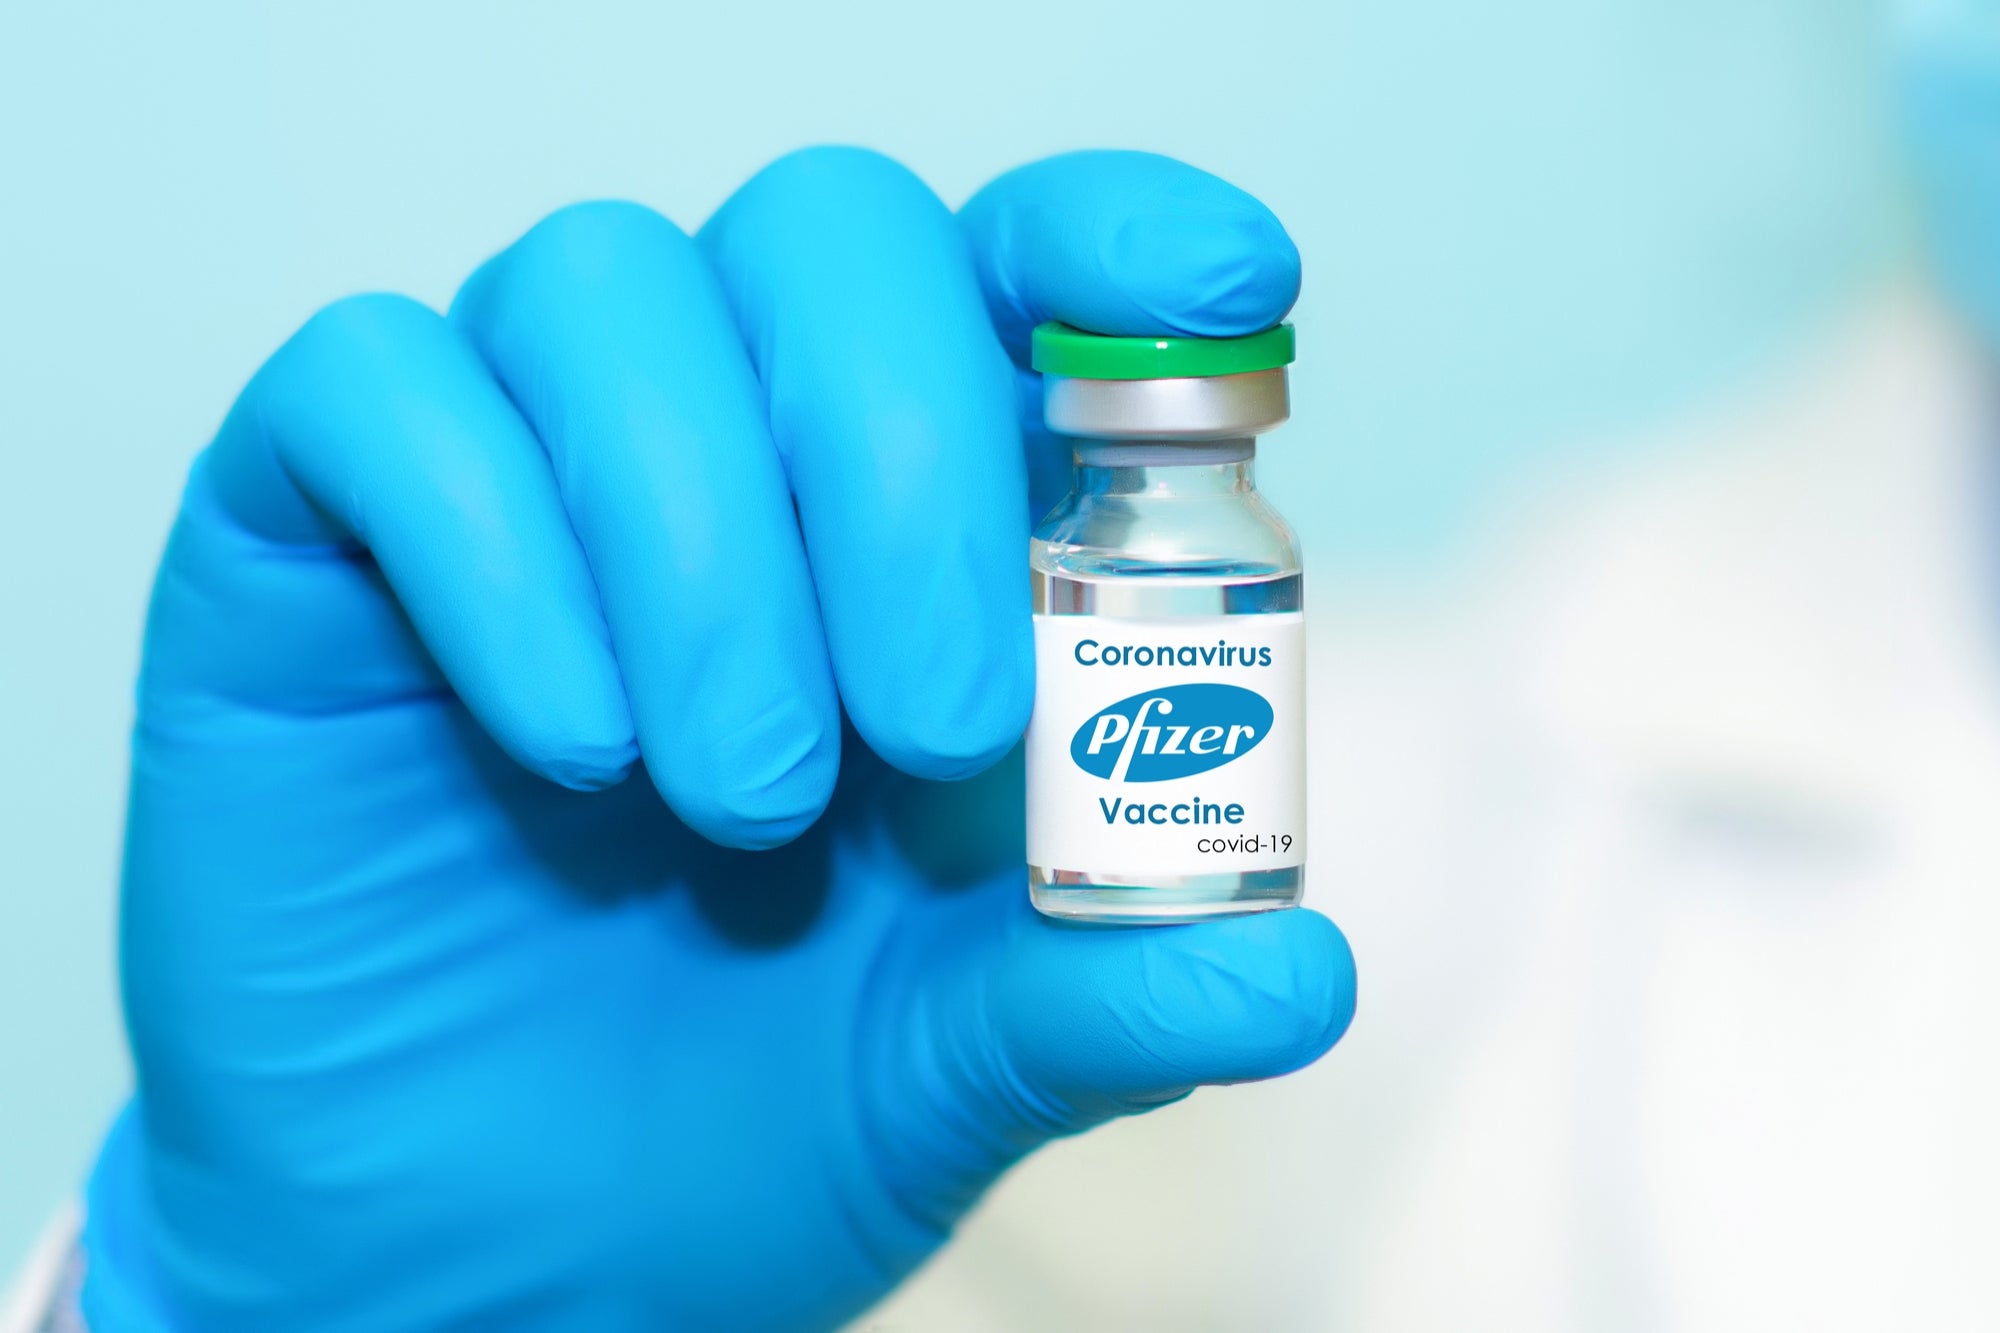 Pfizer changes the name of its vaccine